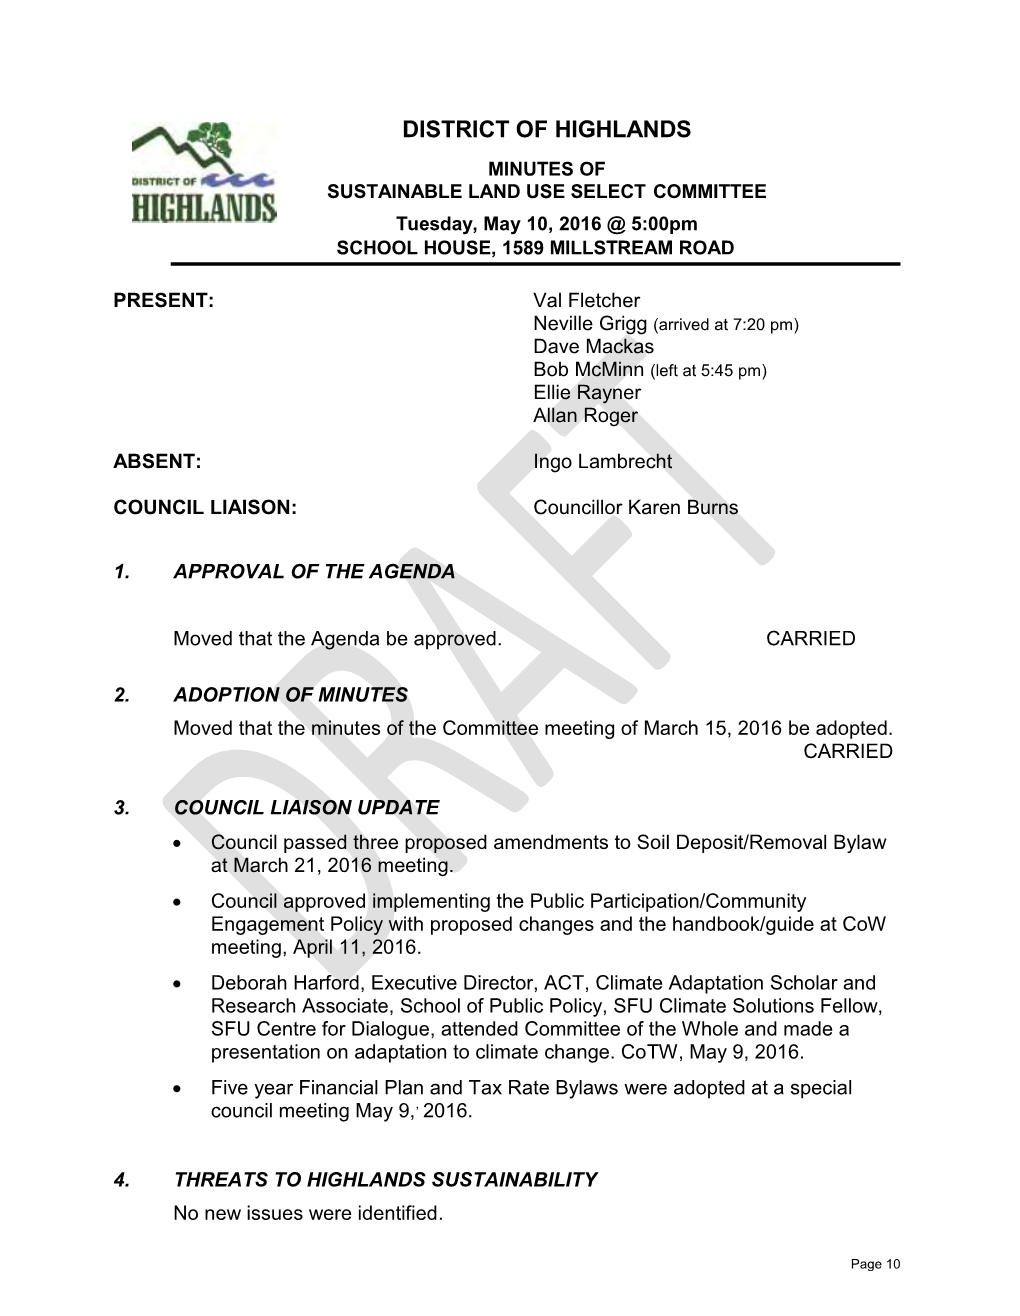 DISTRICT of HIGHLANDS MINUTES of SUSTAINABLE LAND USE SELECT COMMITTEE Tuesday, May 10, 2016 @ 5:00Pm SCHOOL HOUSE, 1589 MILLSTREAM ROAD